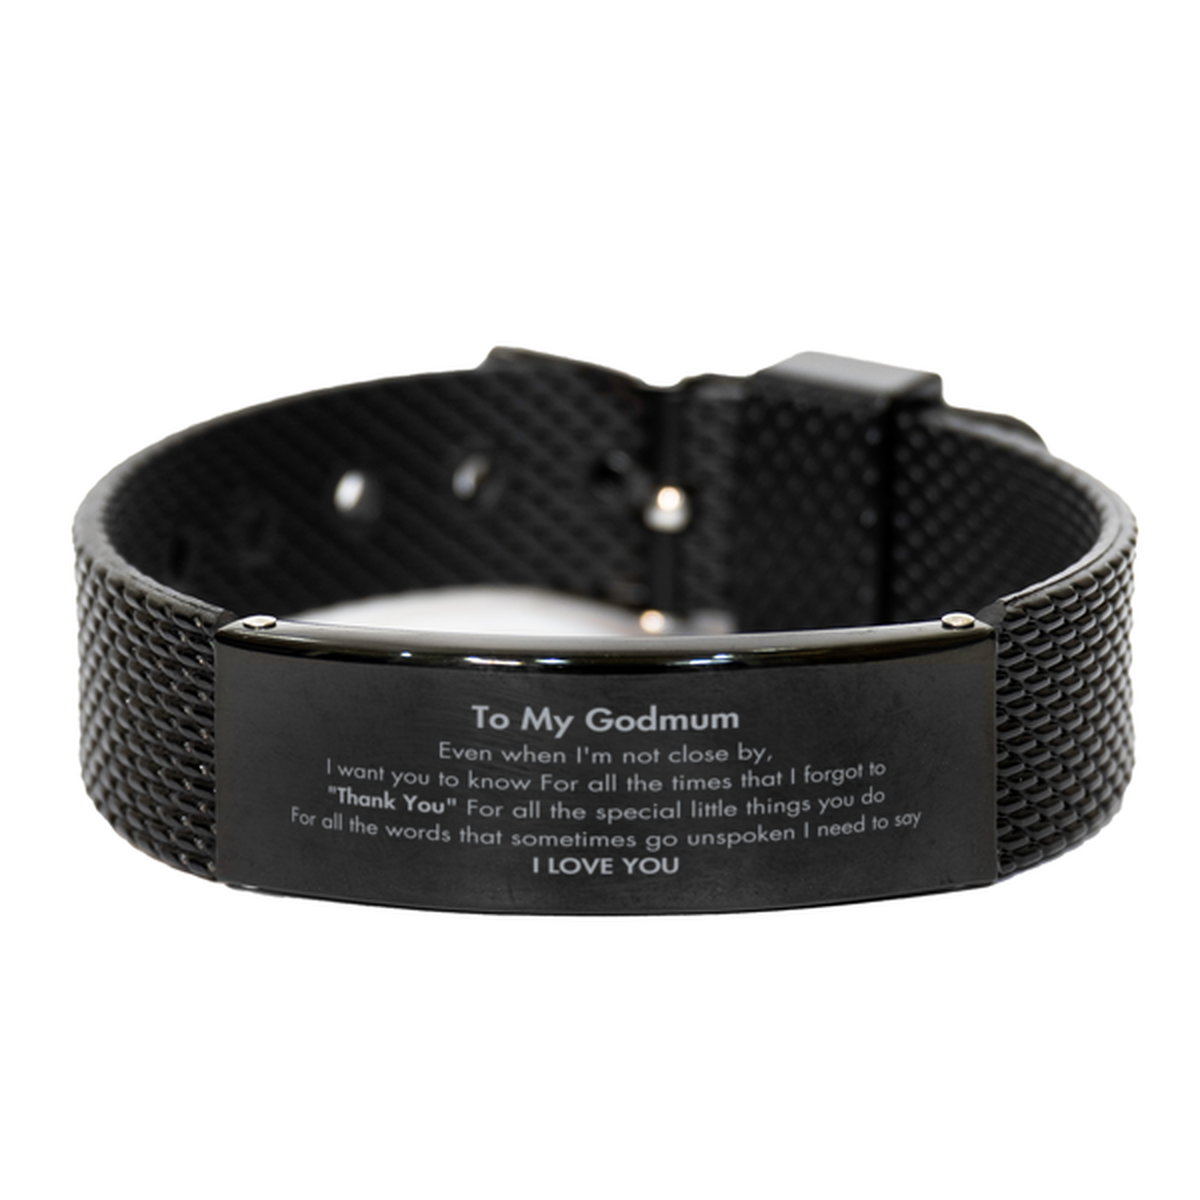 Thank You Gifts for Godmum, Keepsake Black Shark Mesh Bracelet Gifts for Godmum Birthday Mother's day Father's Day Godmum For all the words That sometimes go unspoken I need to say I LOVE YOU